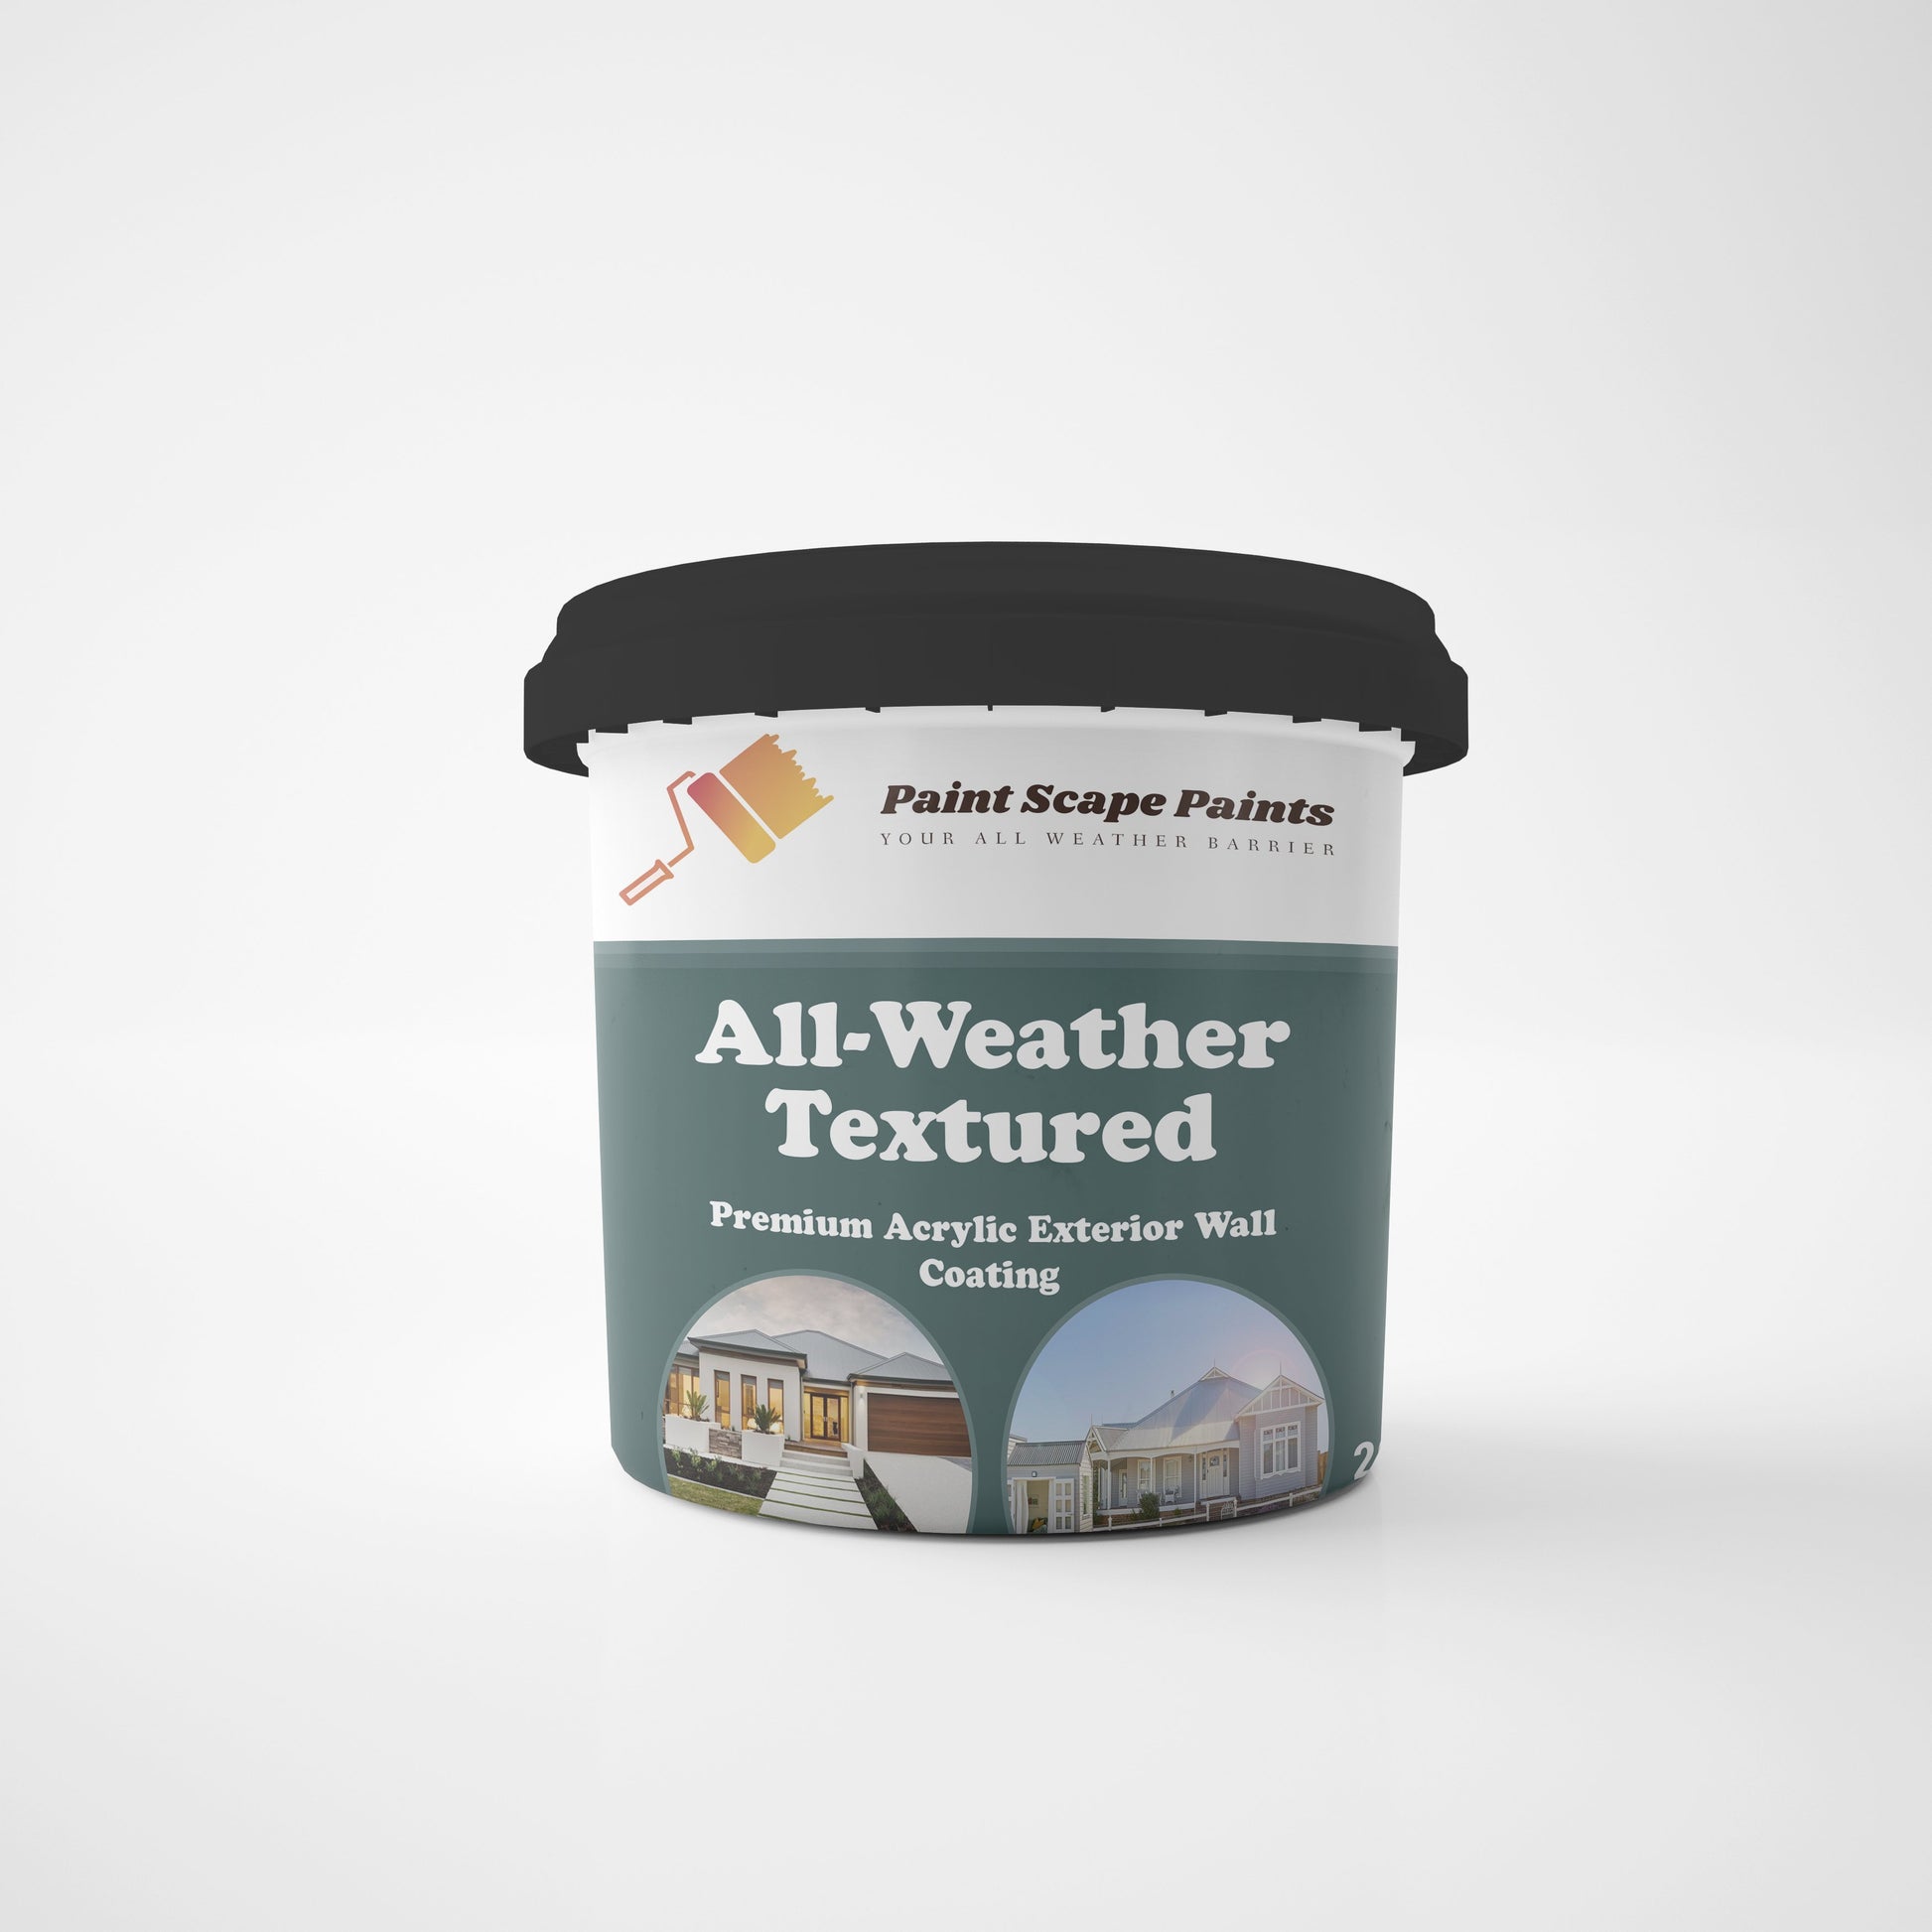 All-Weather Textured Acrylic Paint Scape Paints